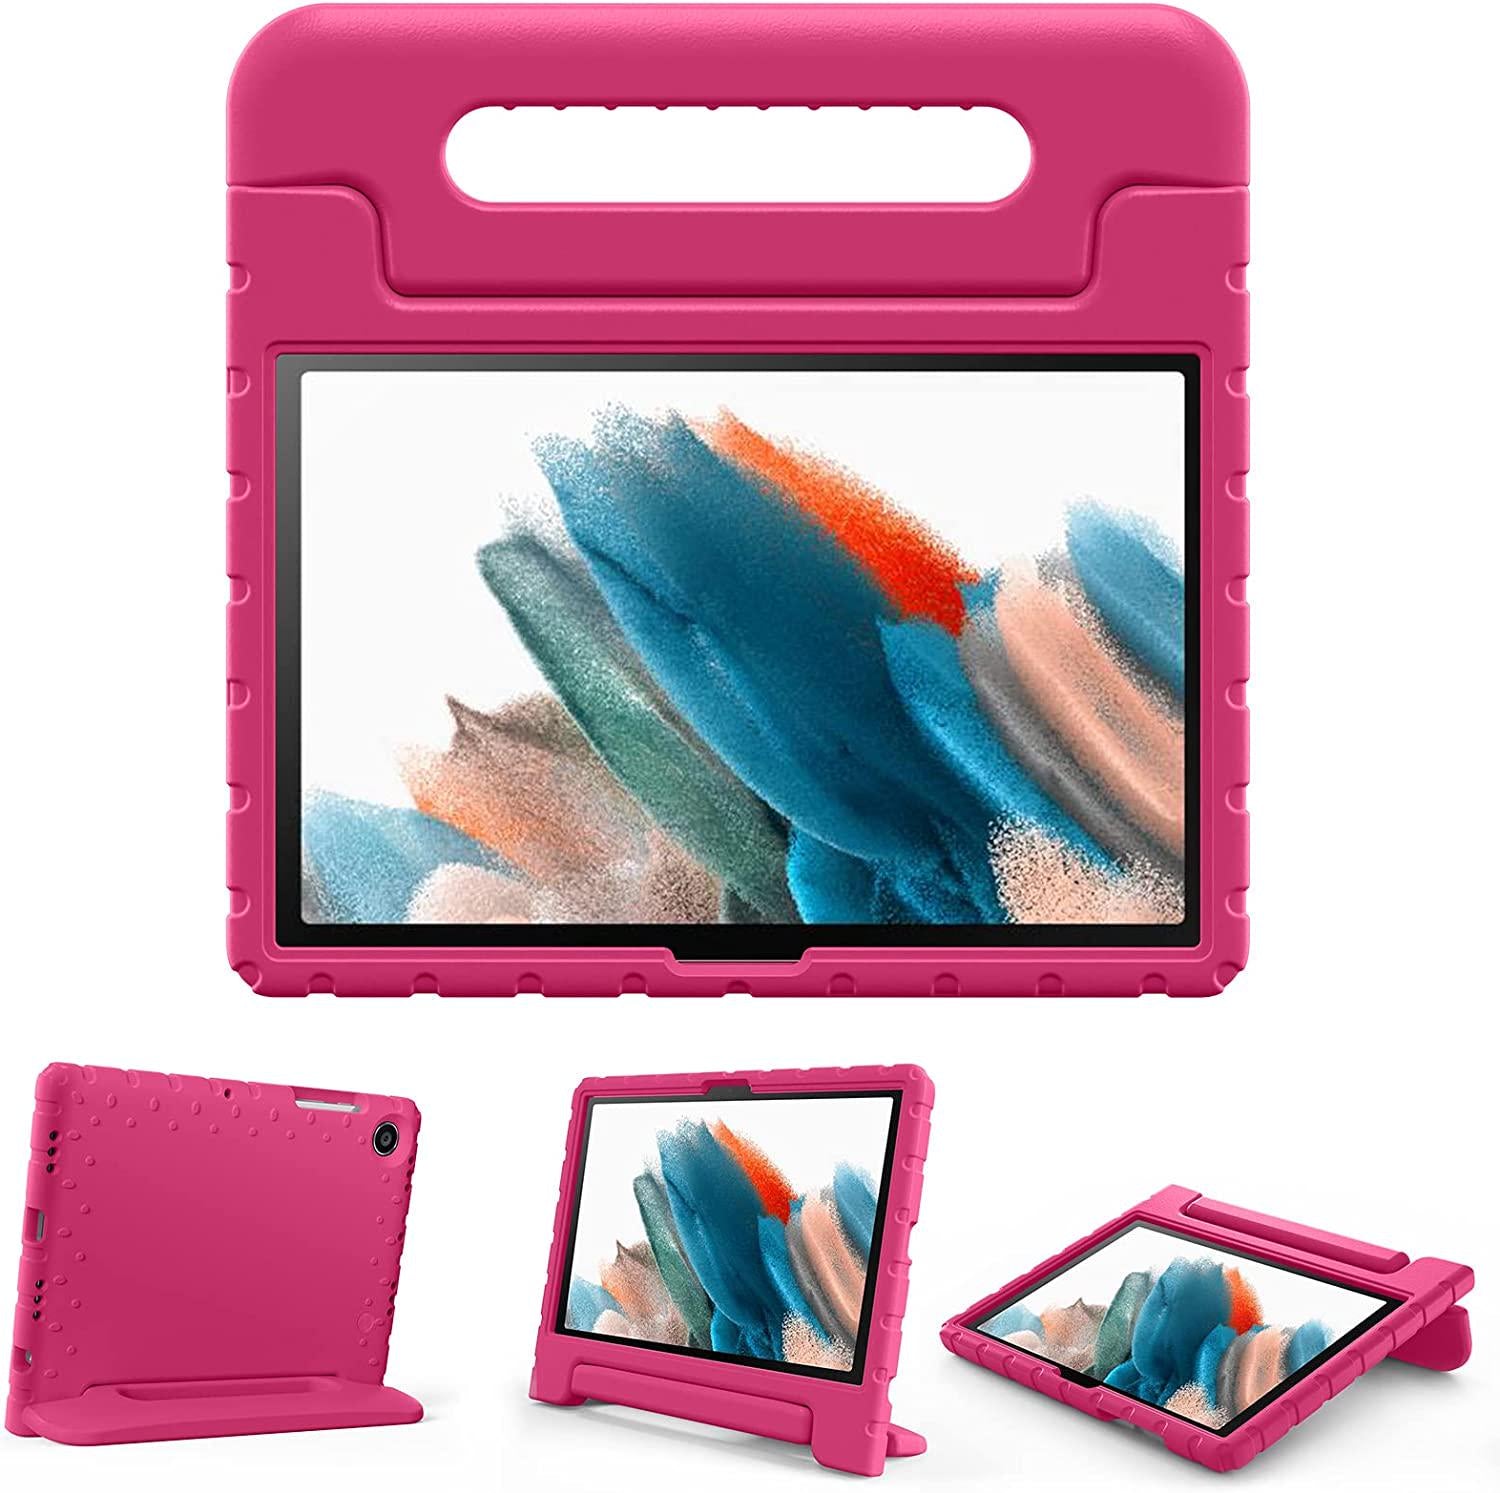 Procase, ProCase for Galaxy Tab A8 Kids Case, Shockproof Stand Cover Lightweight Kids Friendly Protective Case for Galaxy Tab A8 SM-X200/X205/X207 2022 Release Magenta